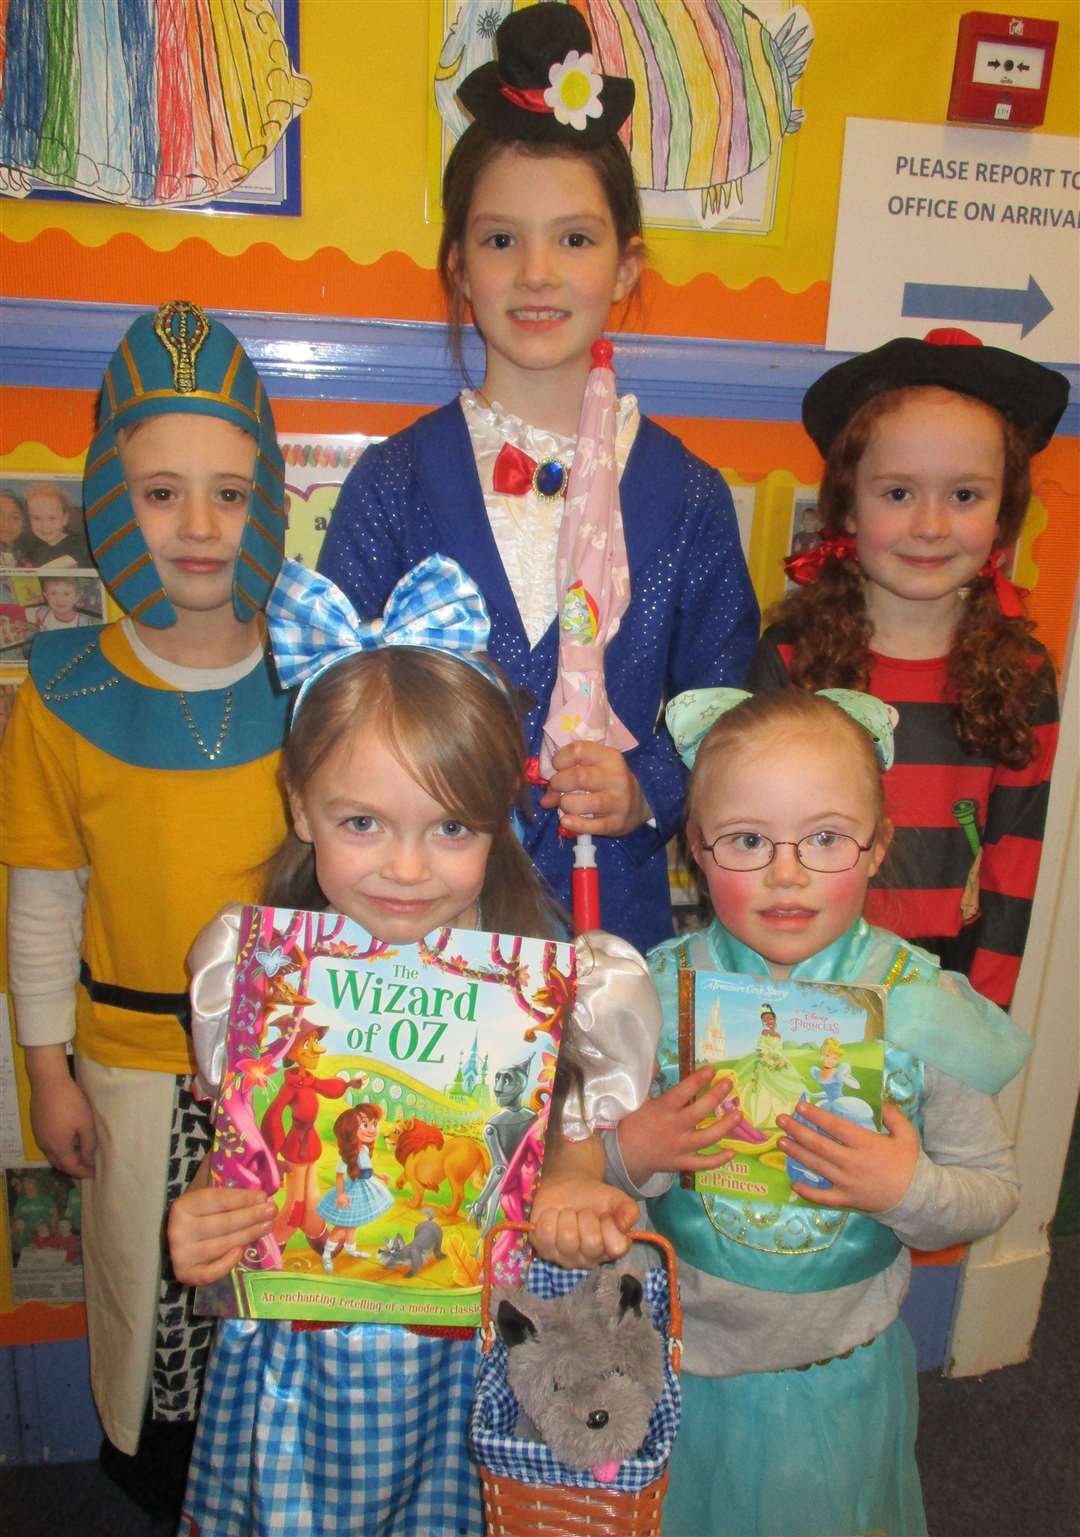 Some of the book characters smiling for the camera.